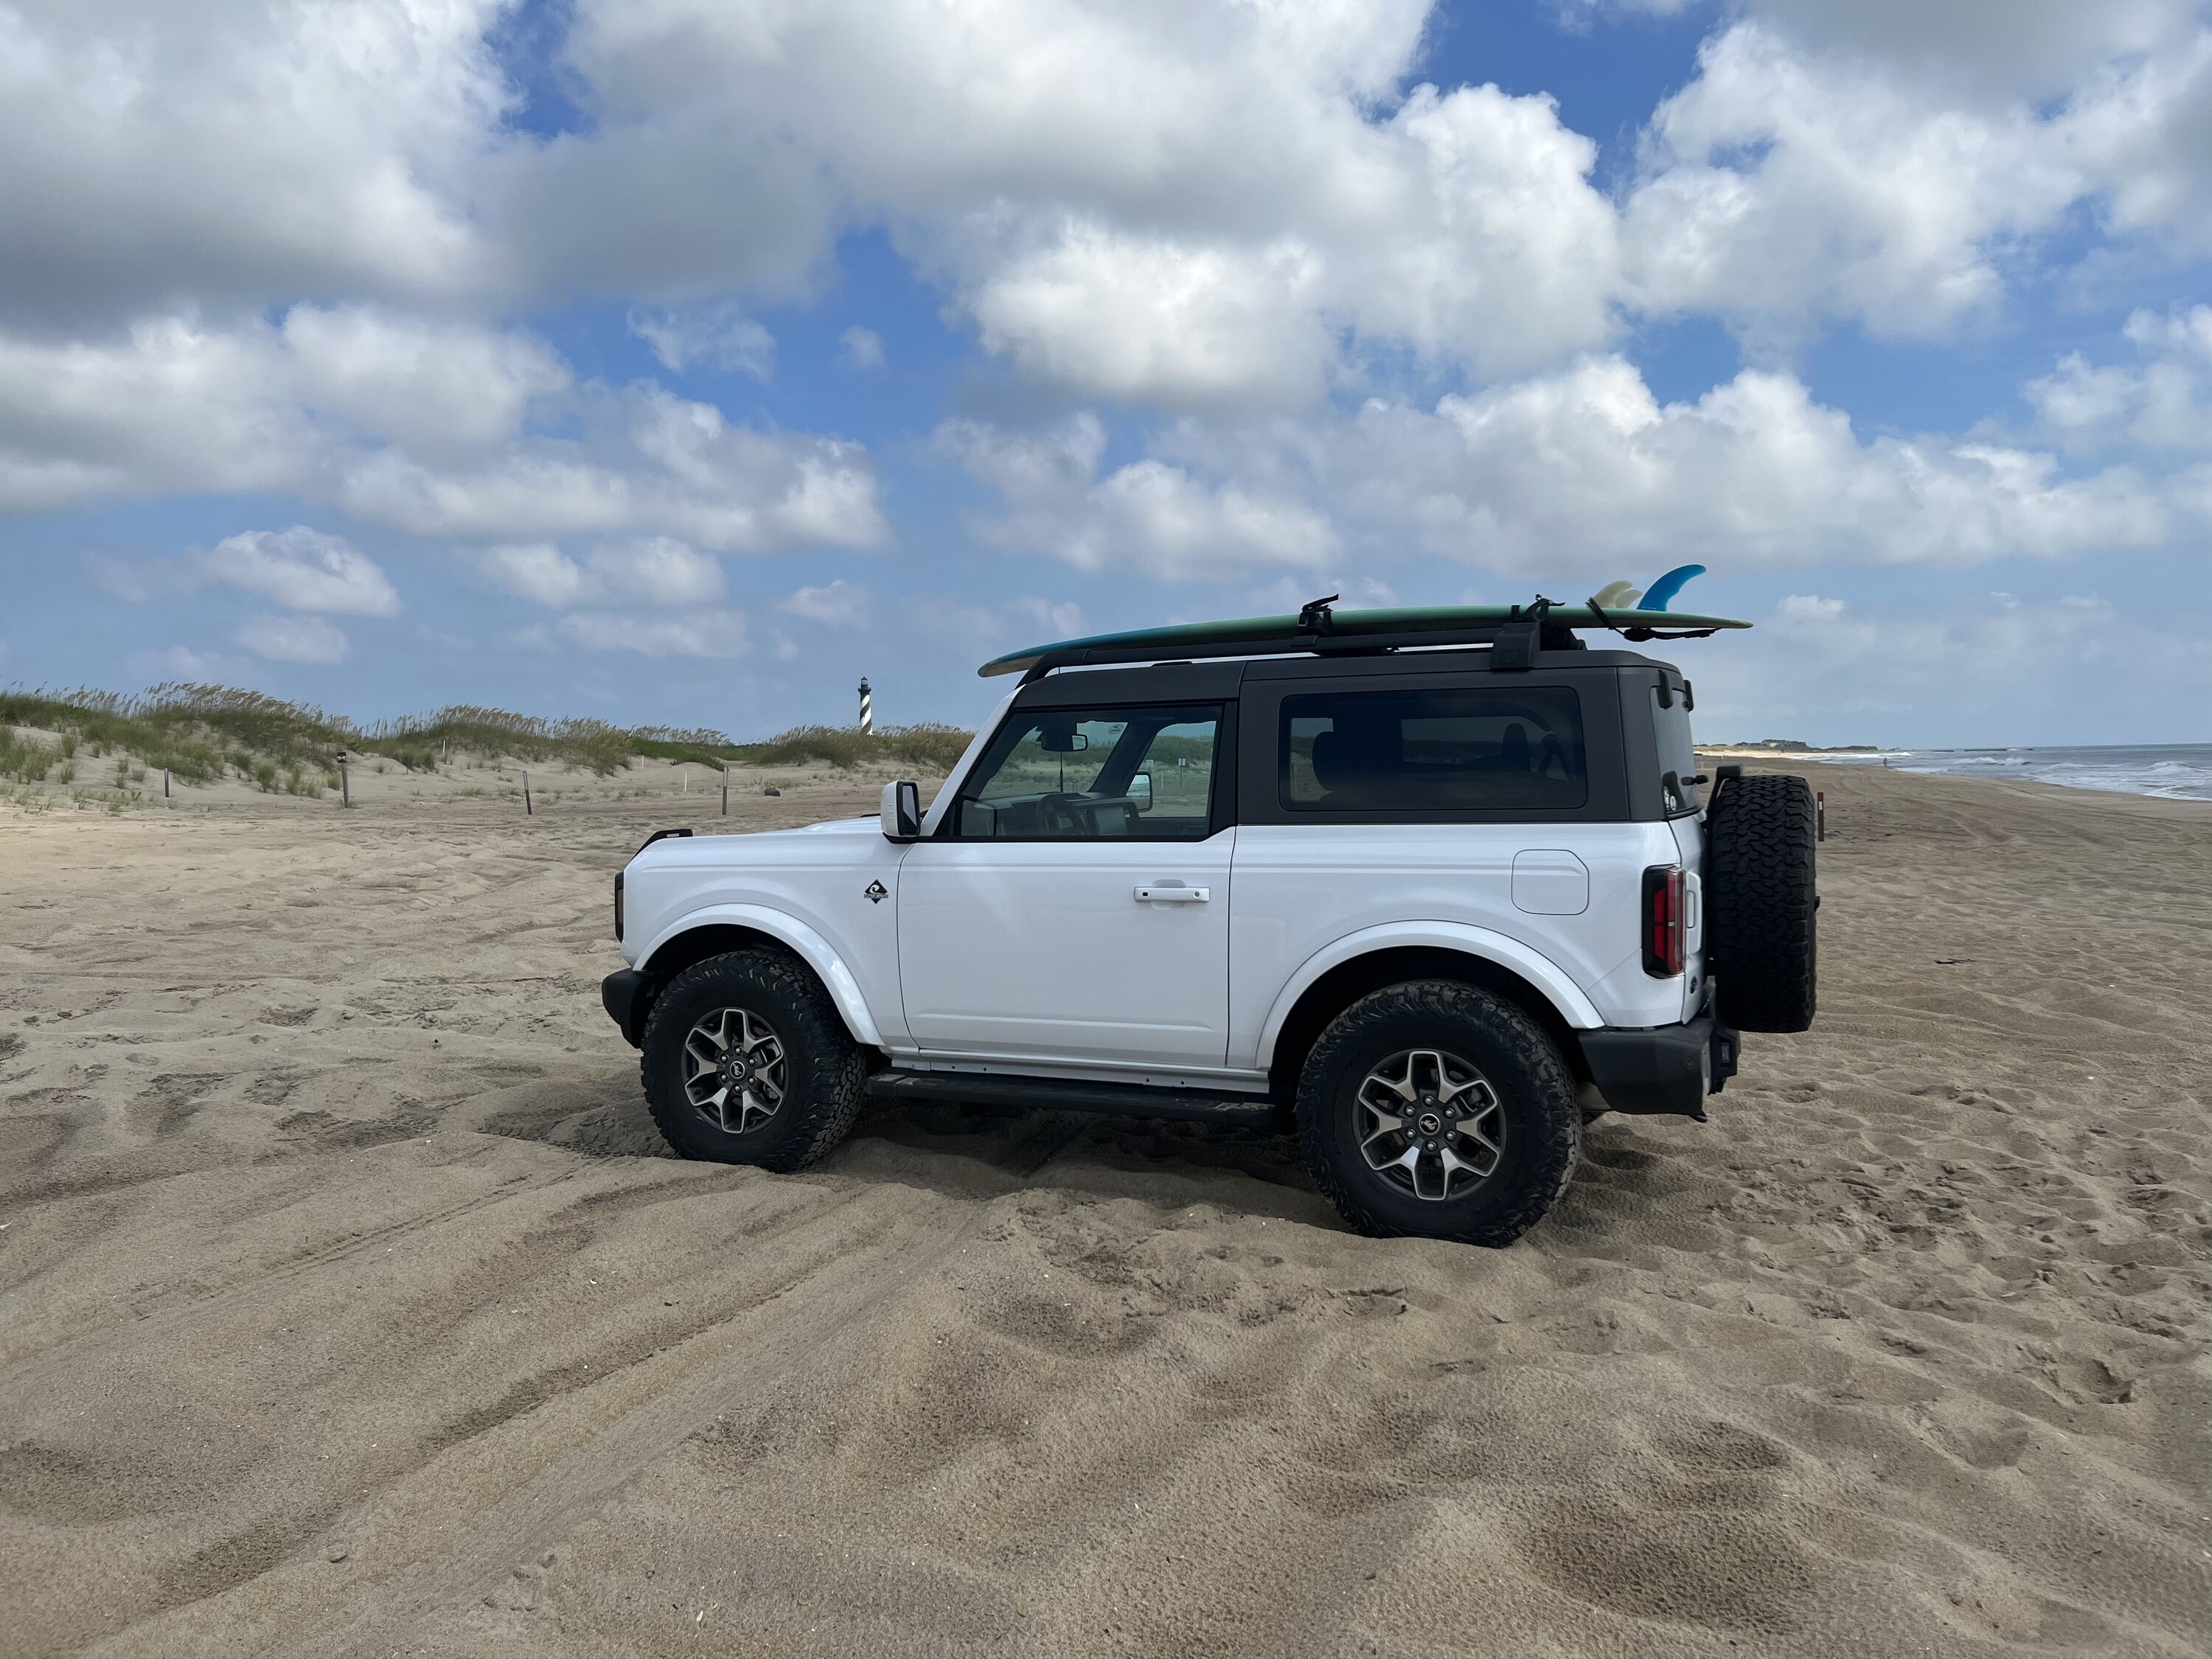 Ford Bronco 2 Door Broncos - What’s on your roof racks? [Photos Thread] IMG_0021